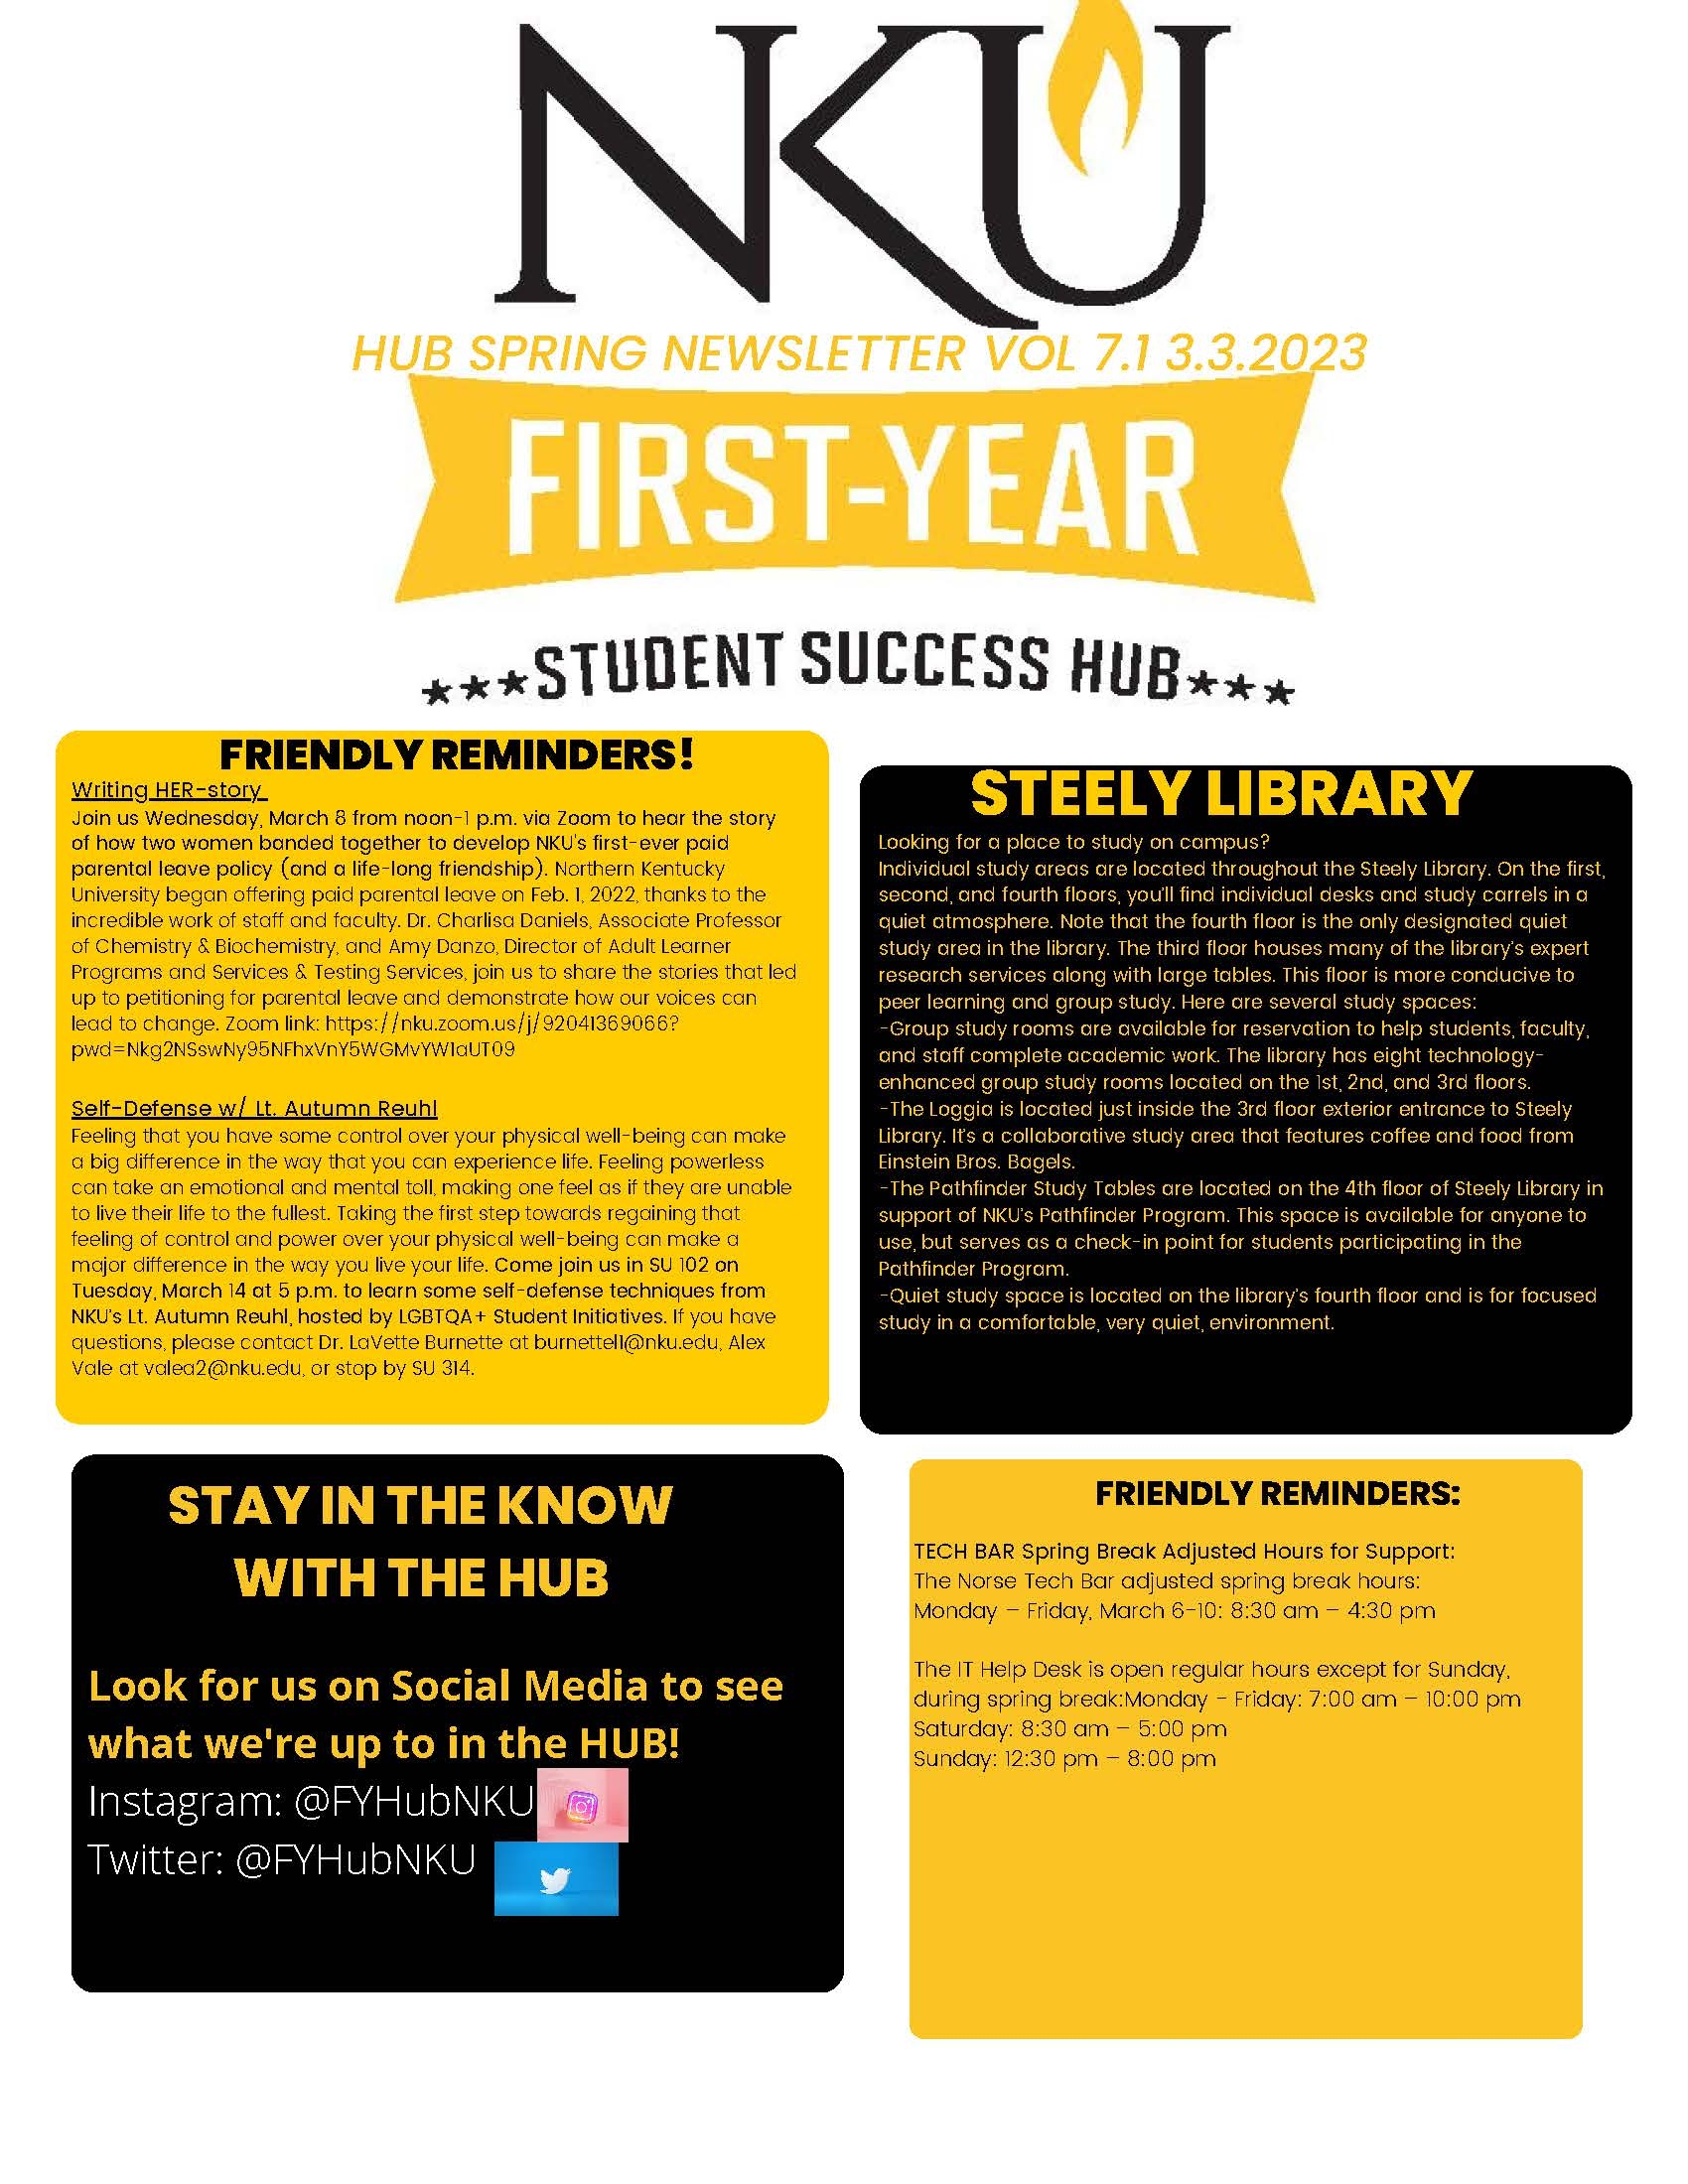 First Year Hub Newsletter for Mar 3 2023 page 2